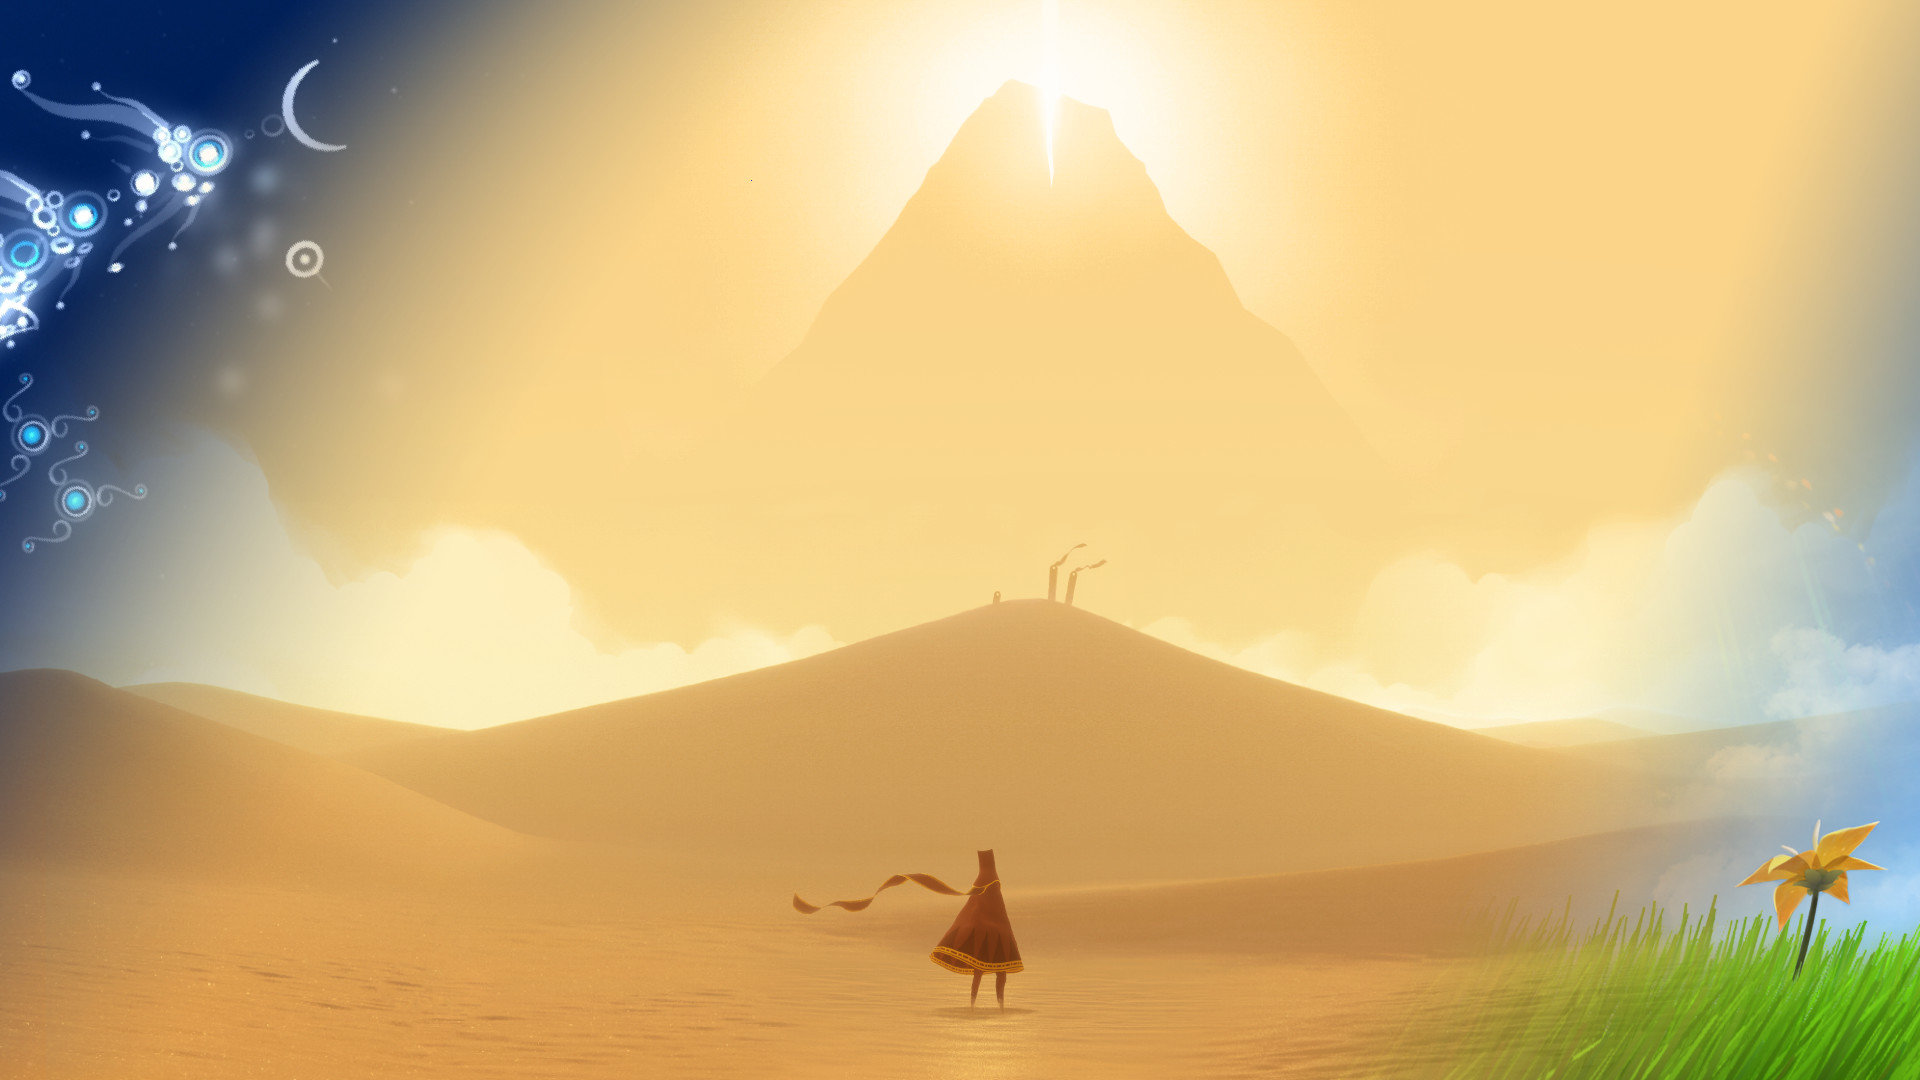 Download full hd 1920x1080 Journey PC background ID:53740 for free